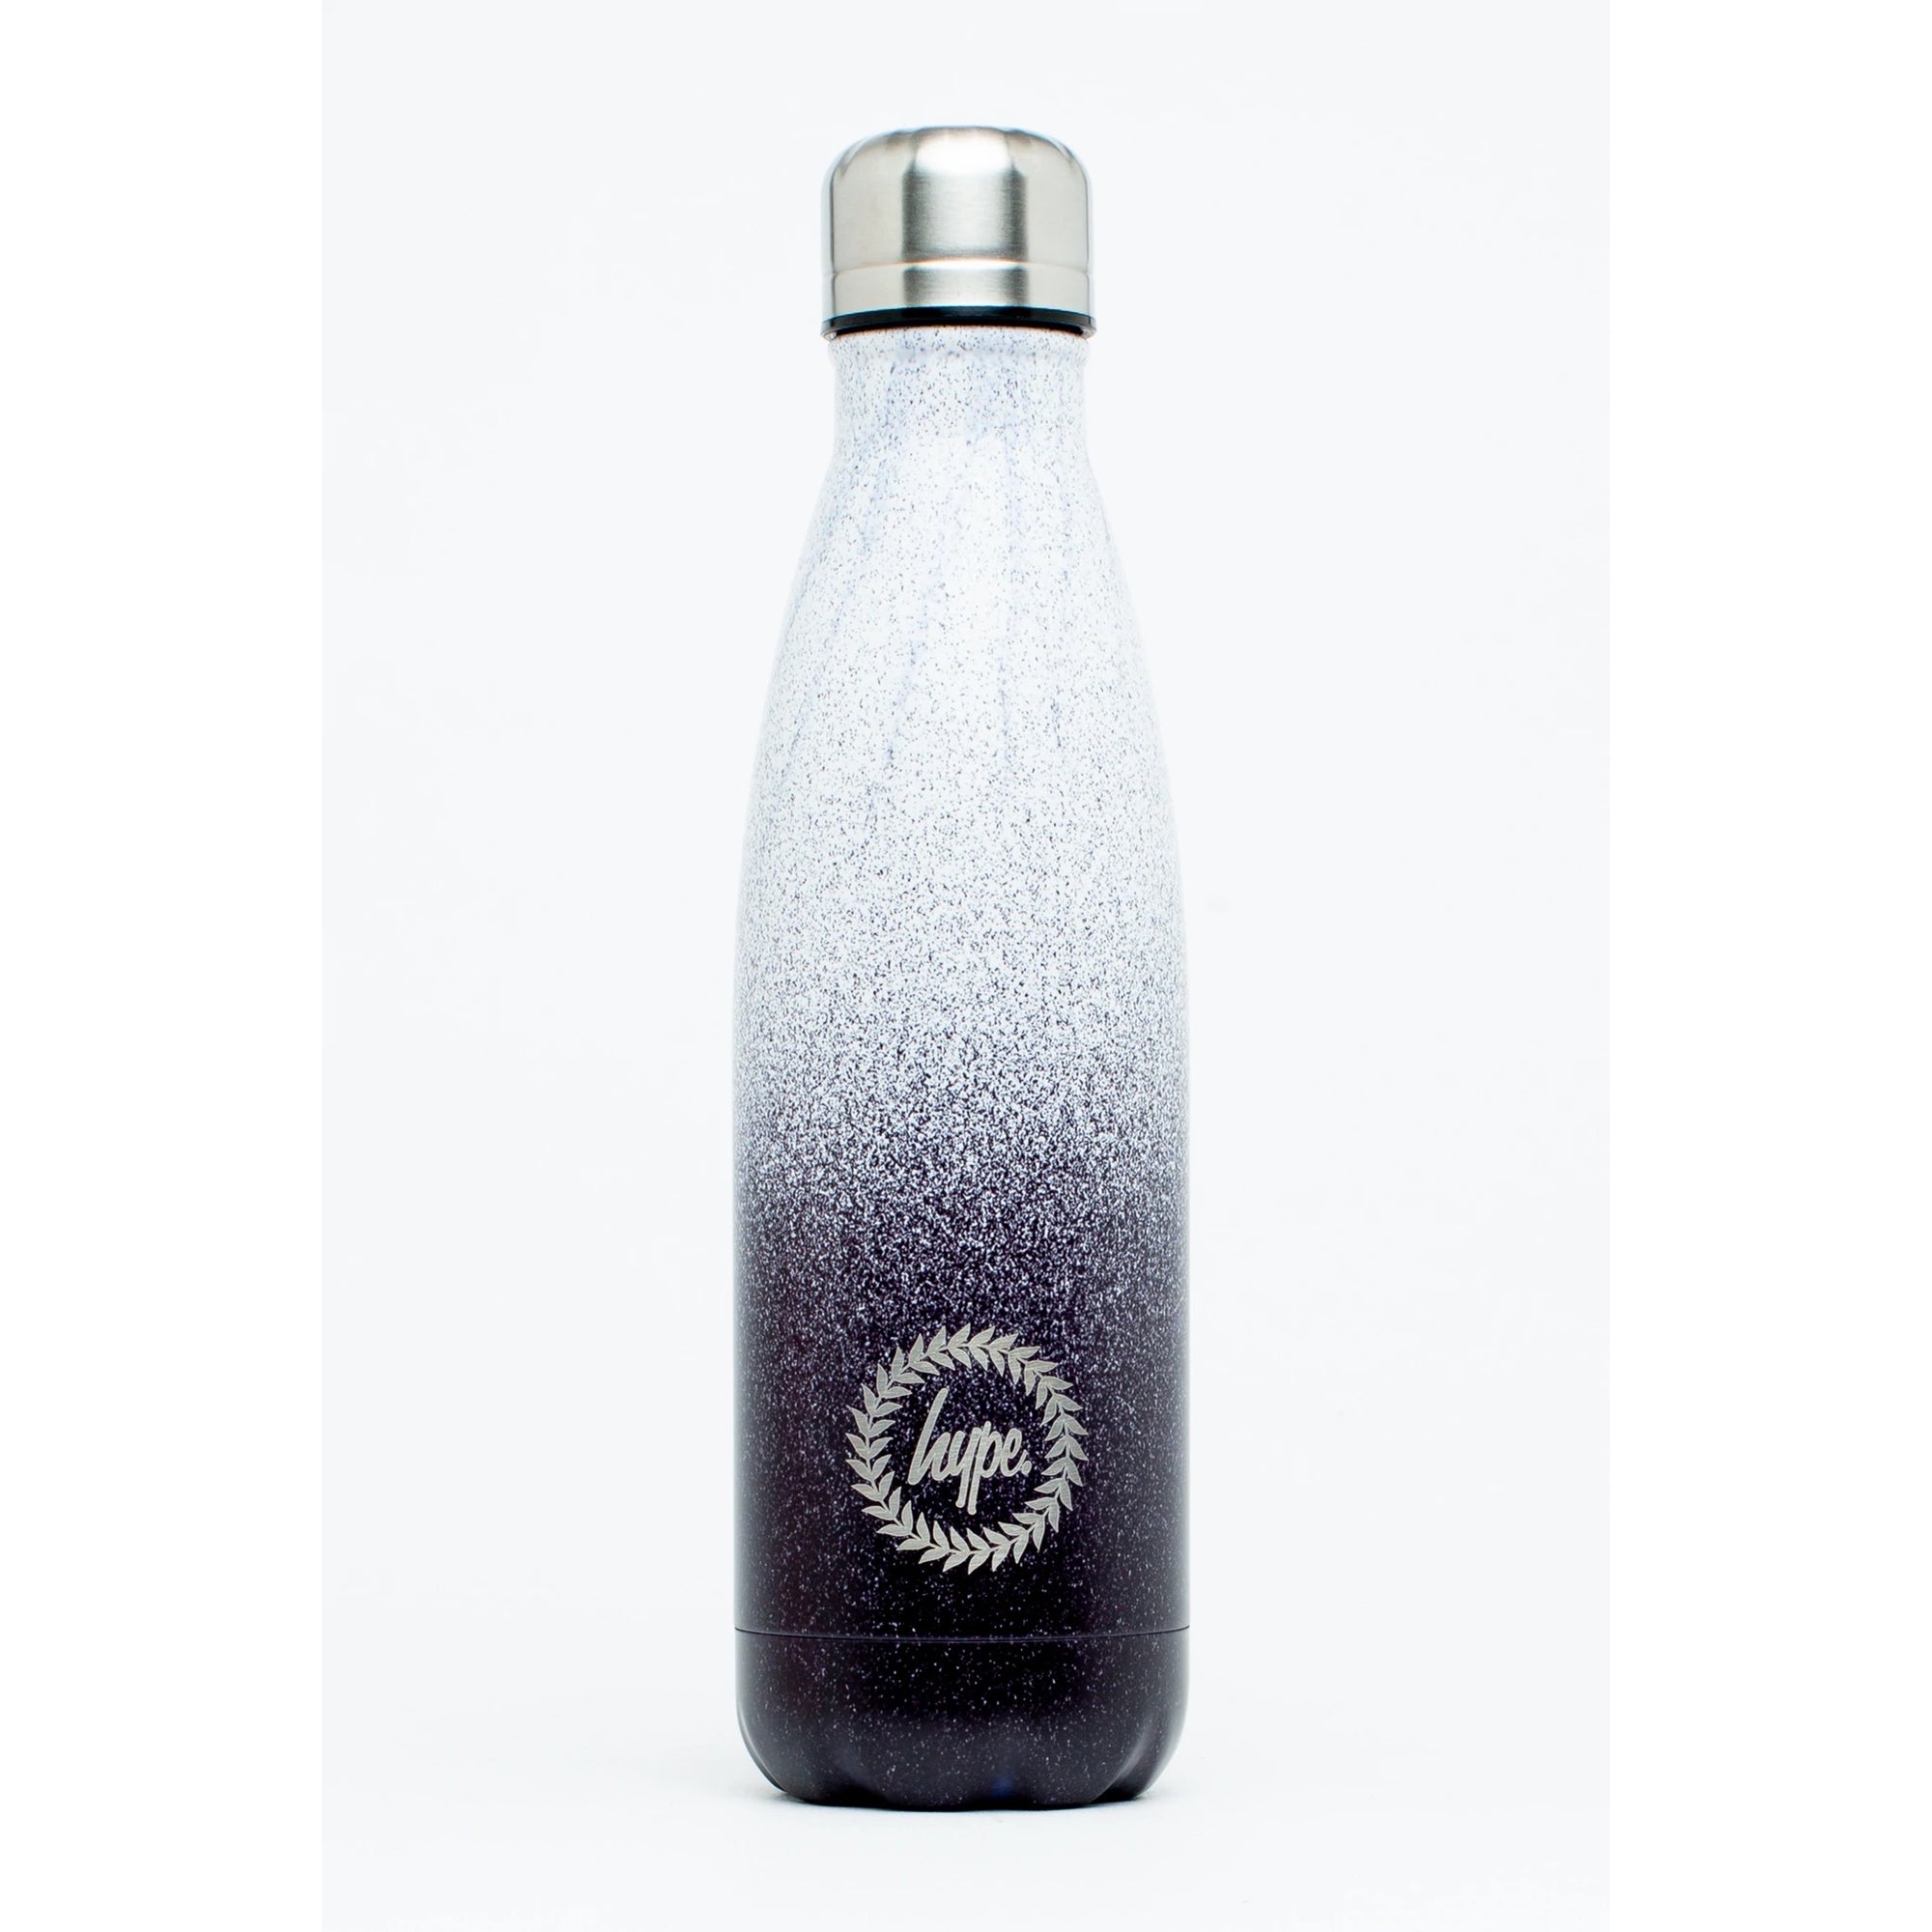 Hype Black Speckle Fade Bottle Zwf837 Accessories ONE SIZE / Black